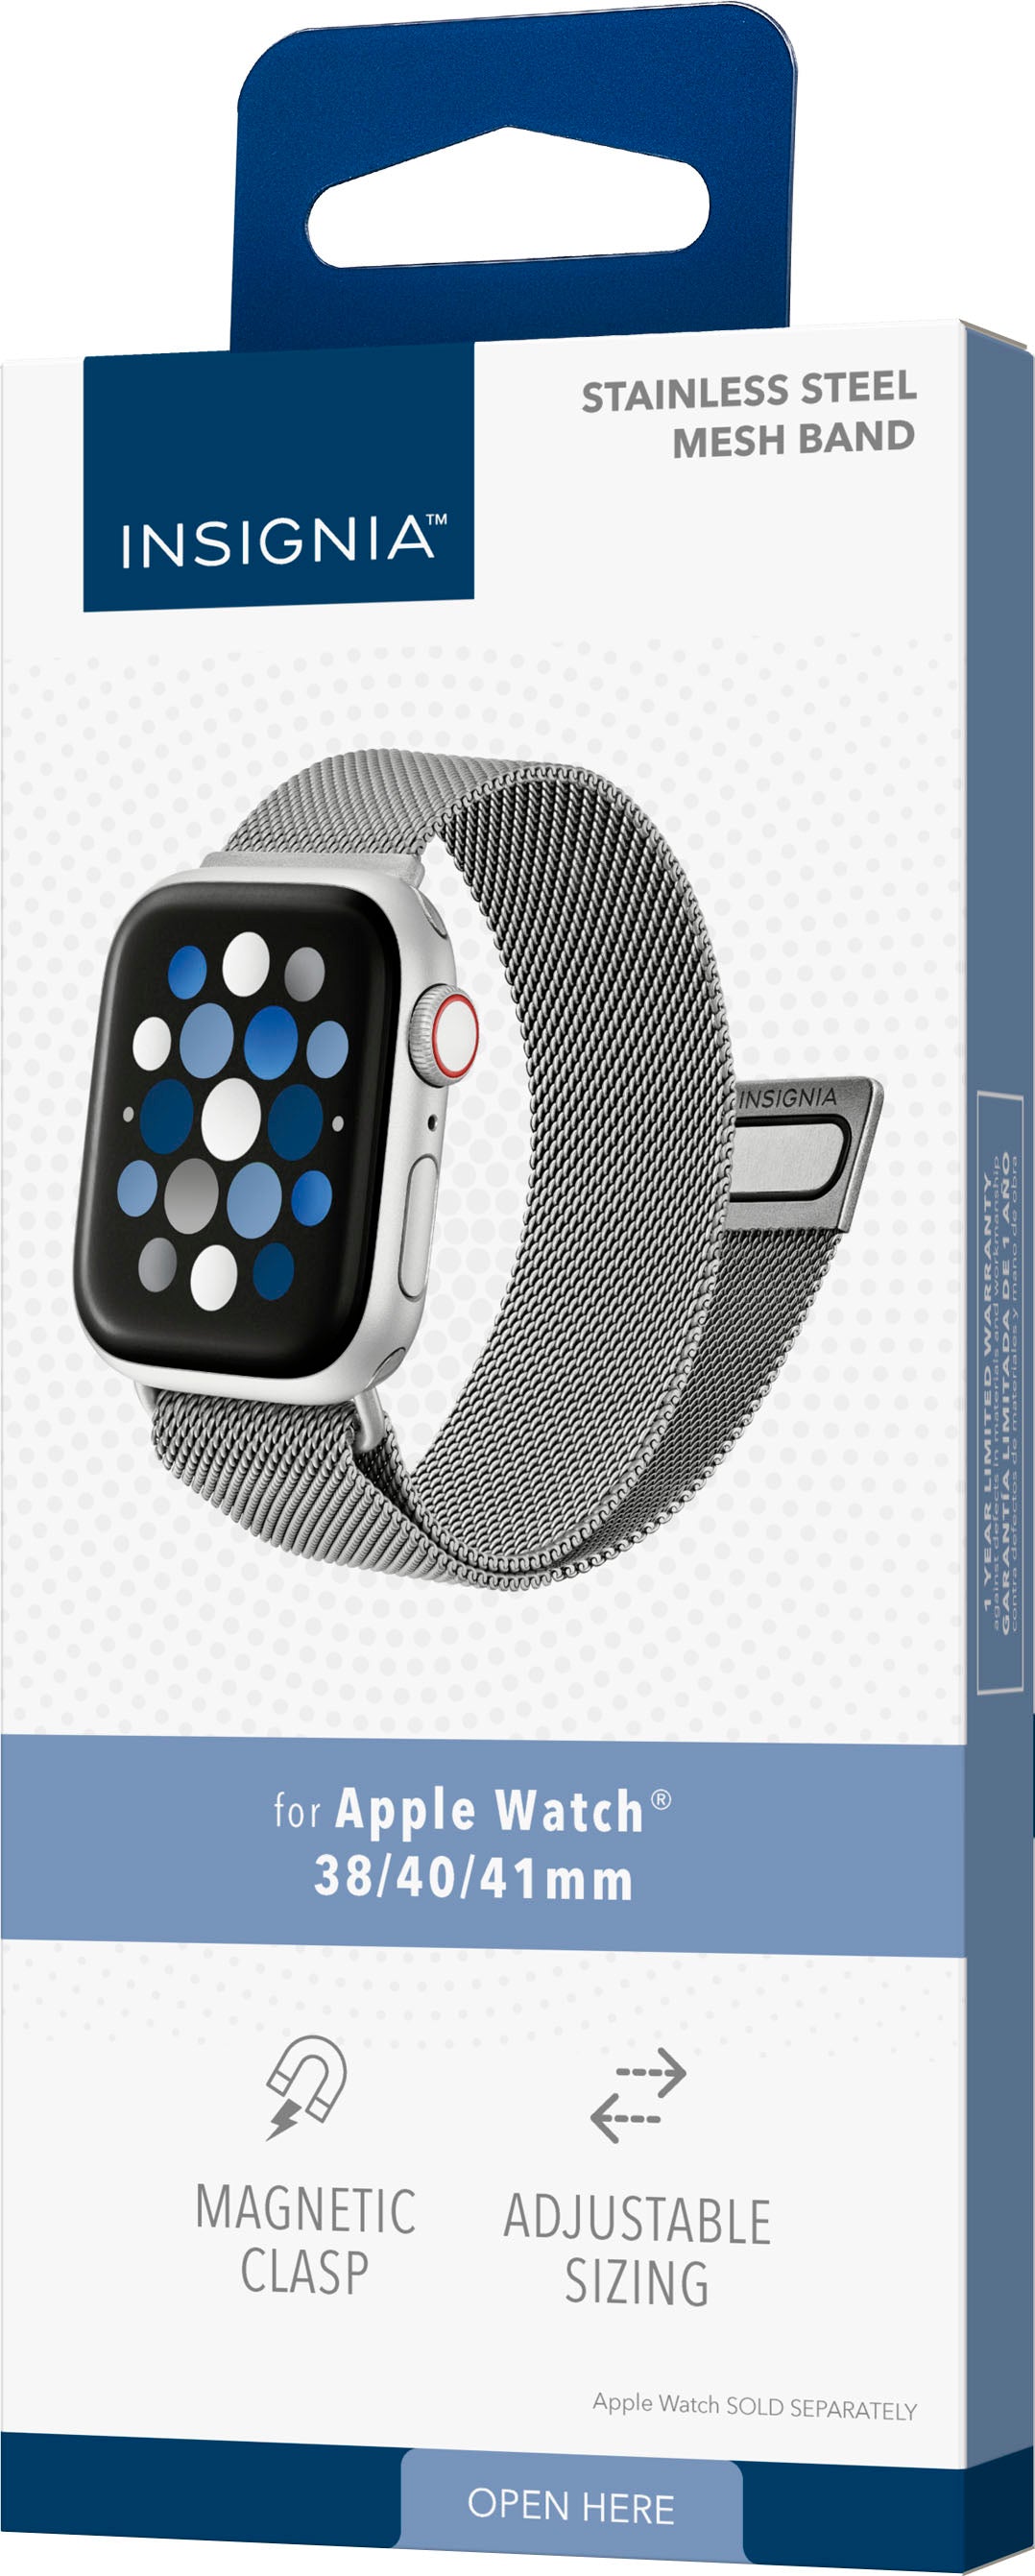 Insignia™ - Stainless Steel Mesh Band for Apple Watch 38mm, 40mm, 41mm and SE - Silver_7